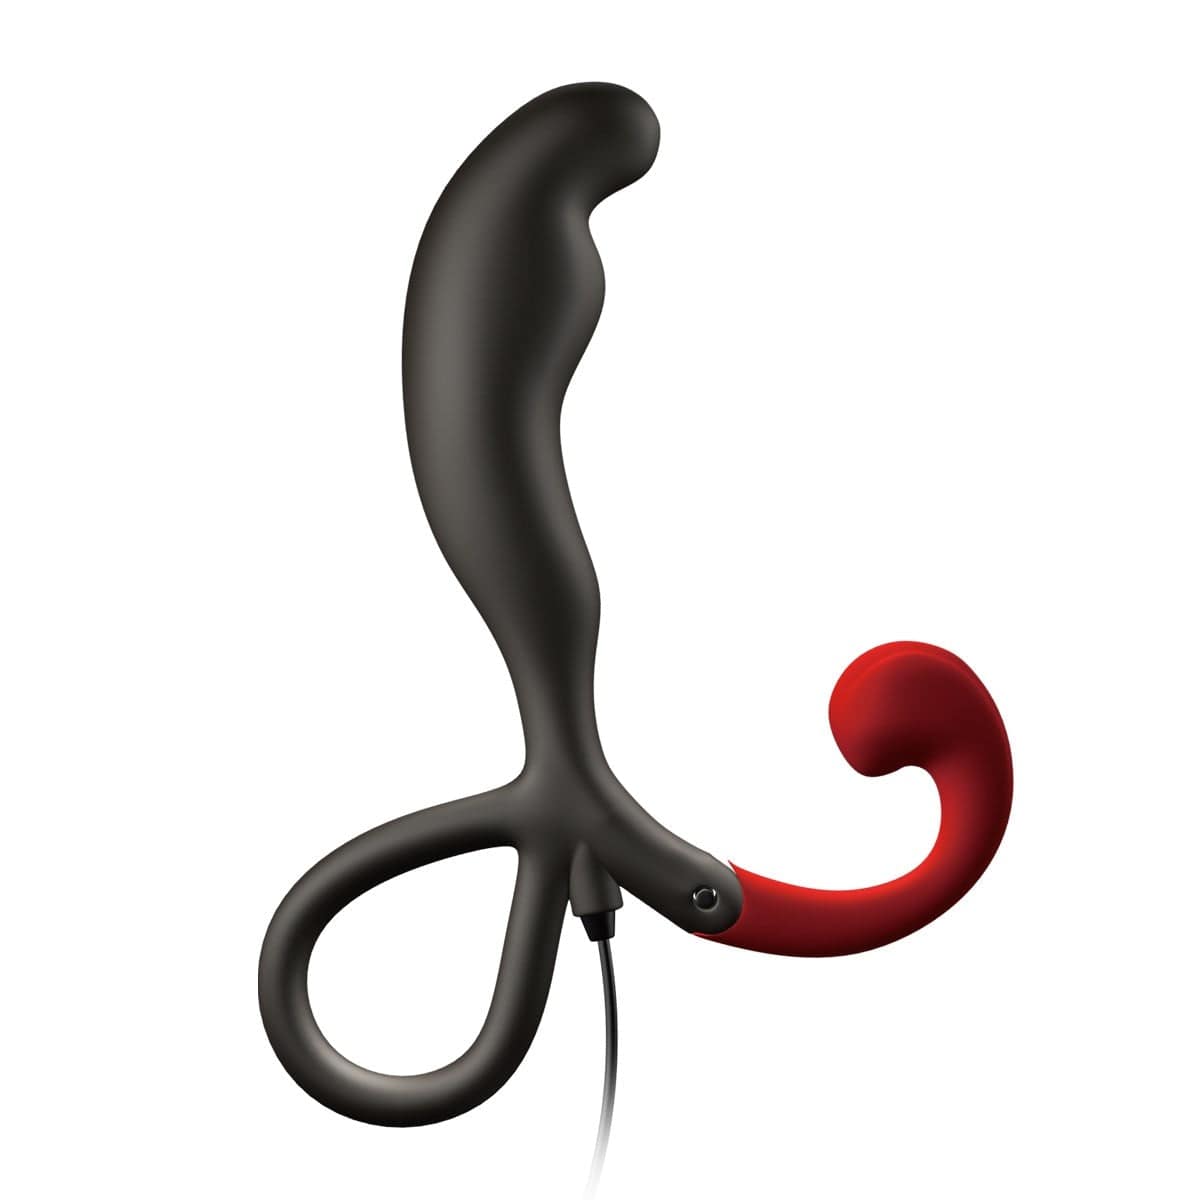 Wild One - Enemable R Type 1 Remote Control Prostate Massager (Black) Remote Control Anal Plug (Vibration) Non Rechargeable 621274962 CherryAffairs